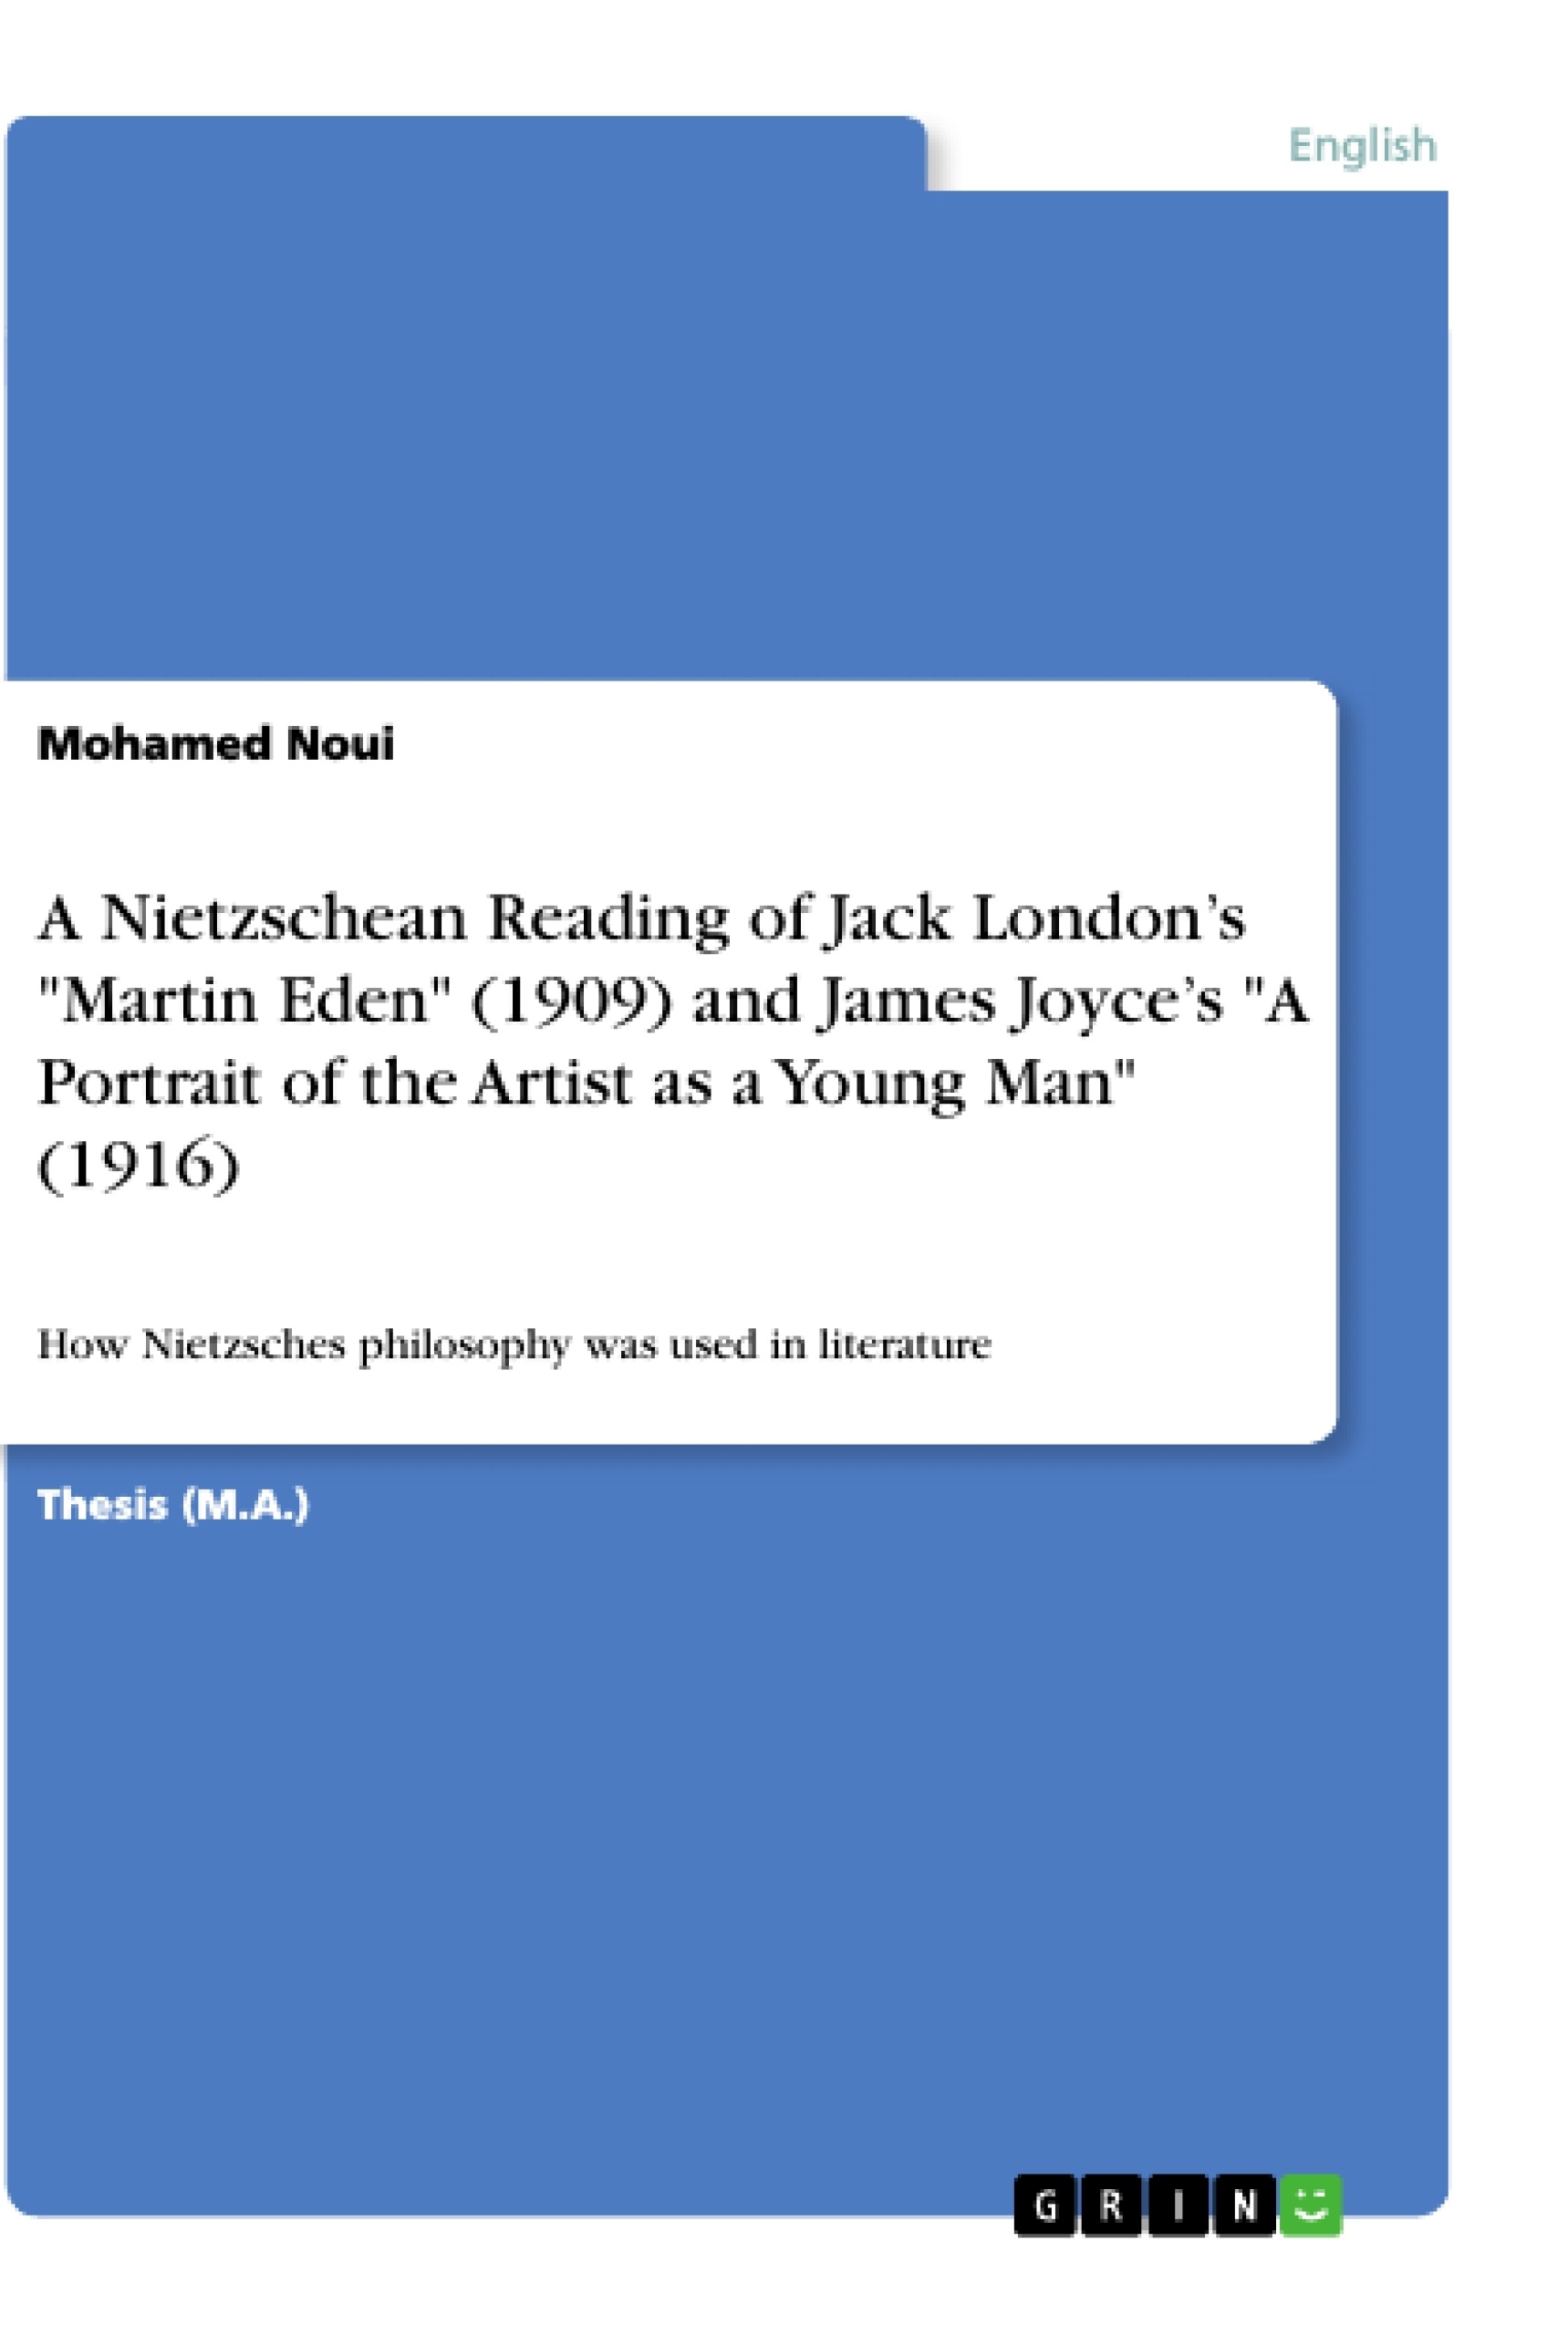 Title: A Nietzschean Reading of Jack London’s "Martin Eden" (1909) and James Joyce’s "A Portrait of the
Artist as a Young Man" (1916)